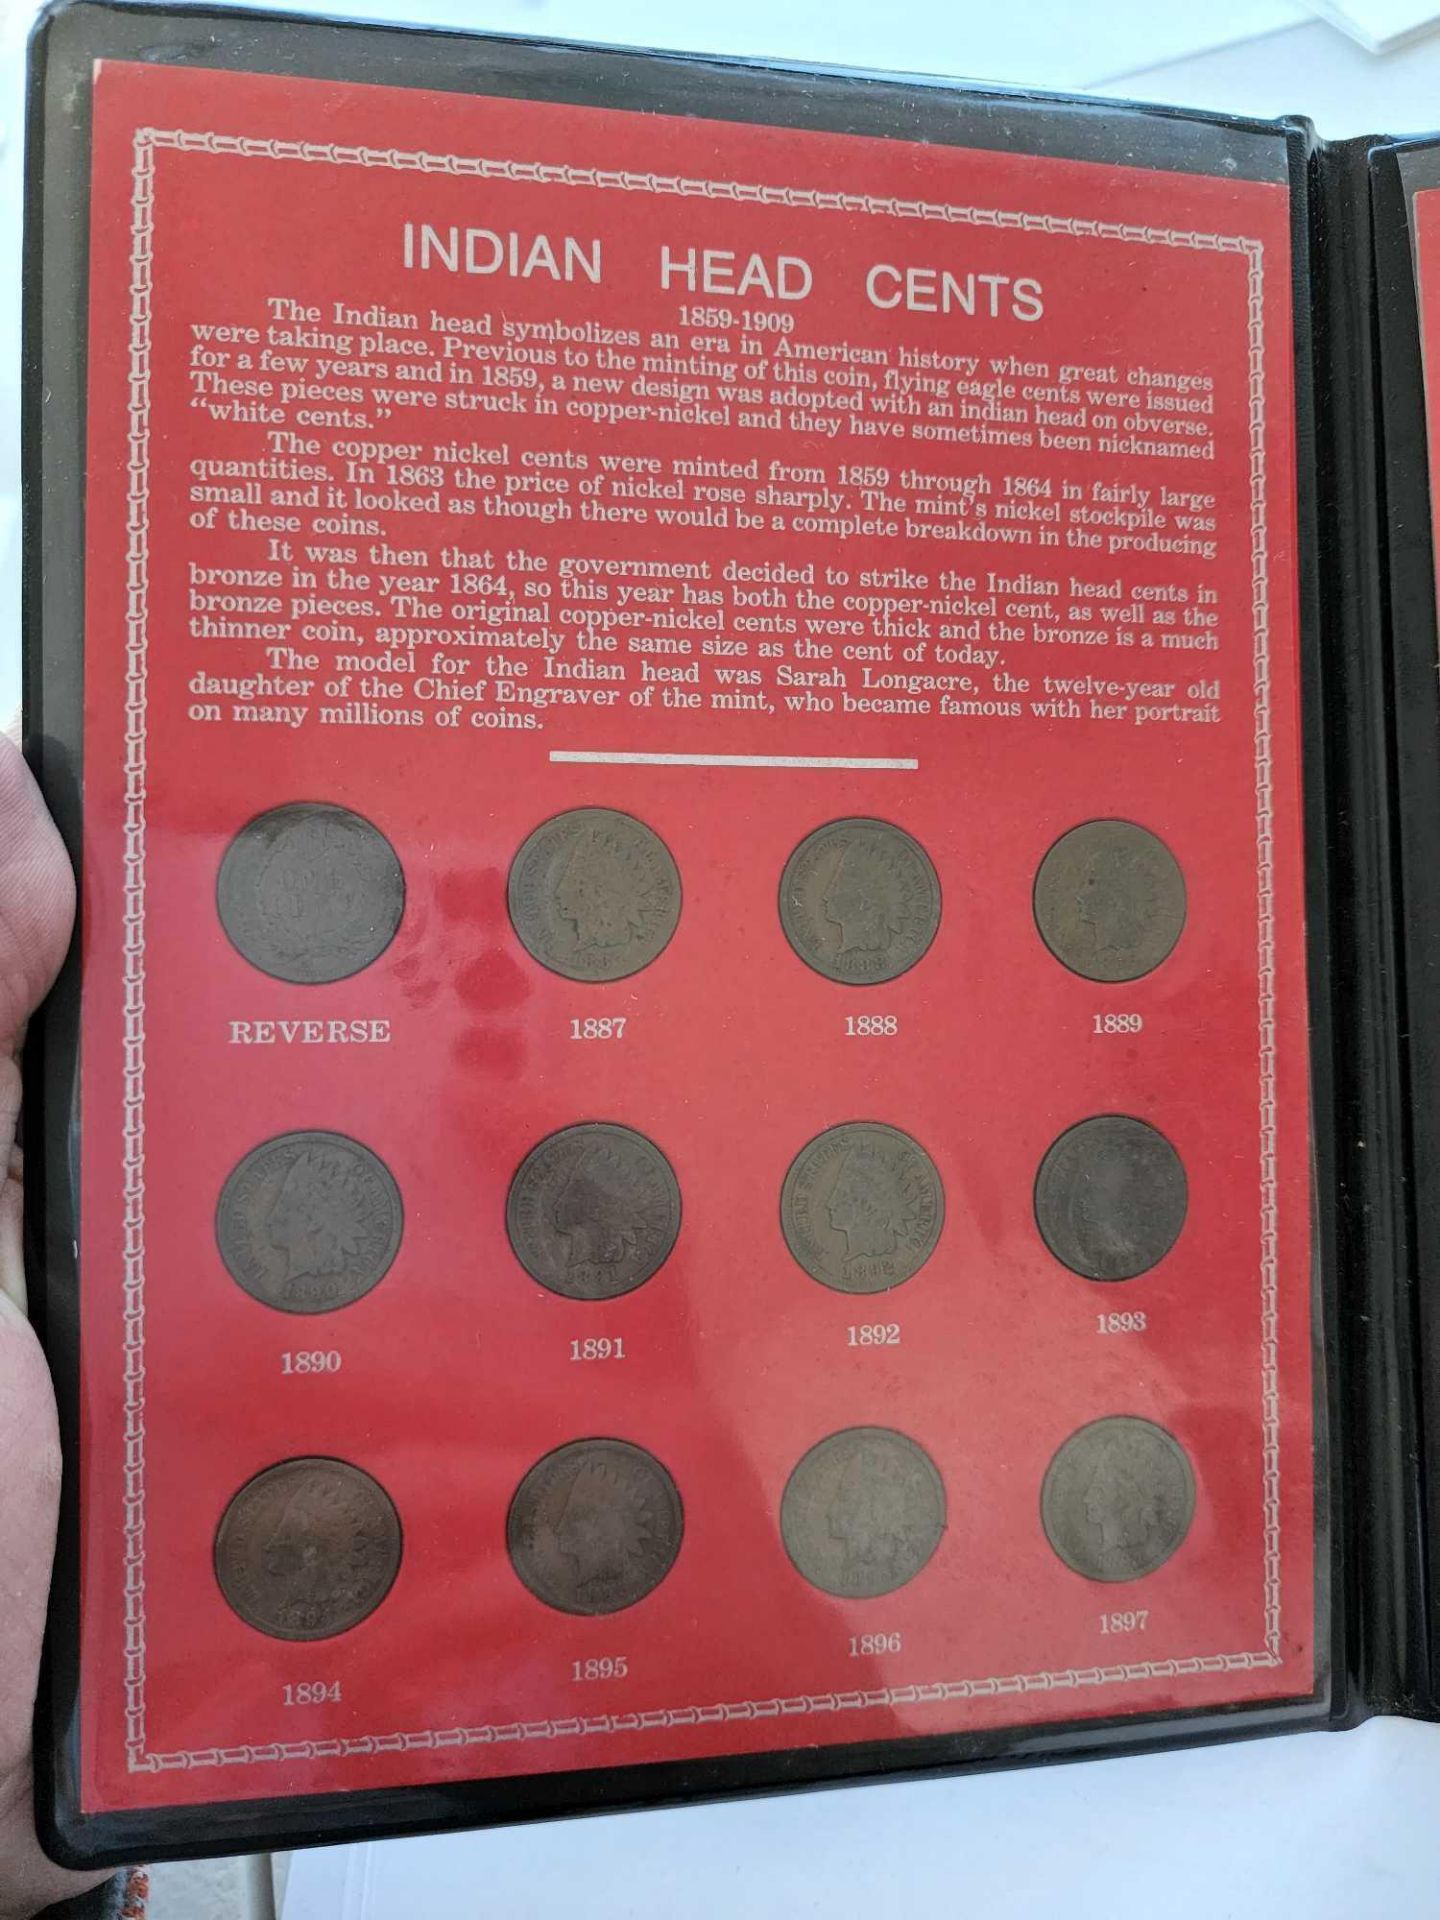 Indian head cents collectable book - Image 2 of 5